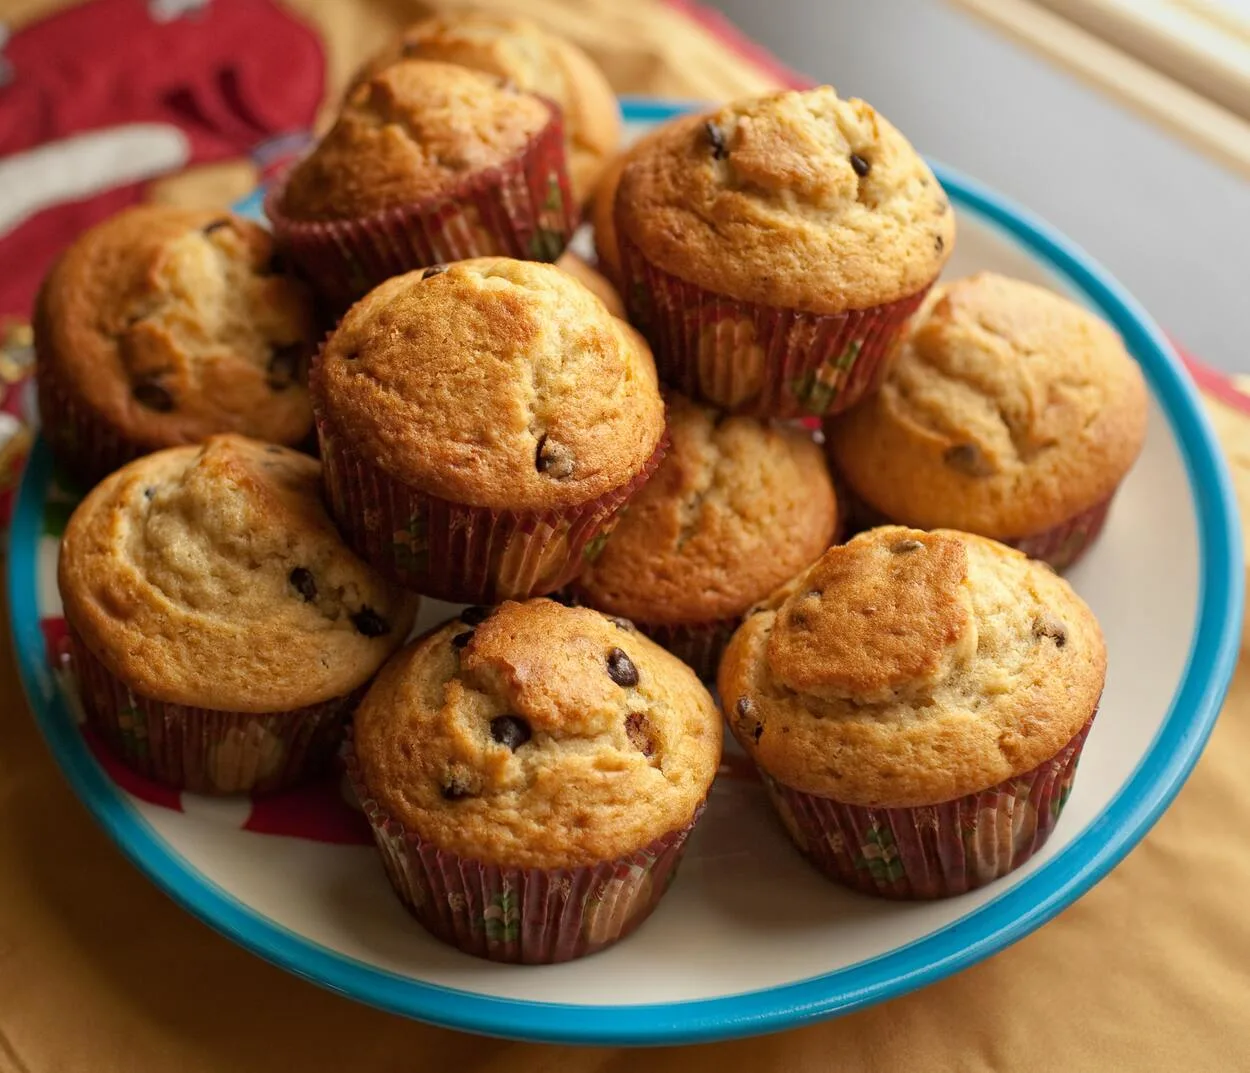 Perfectly baked muffins